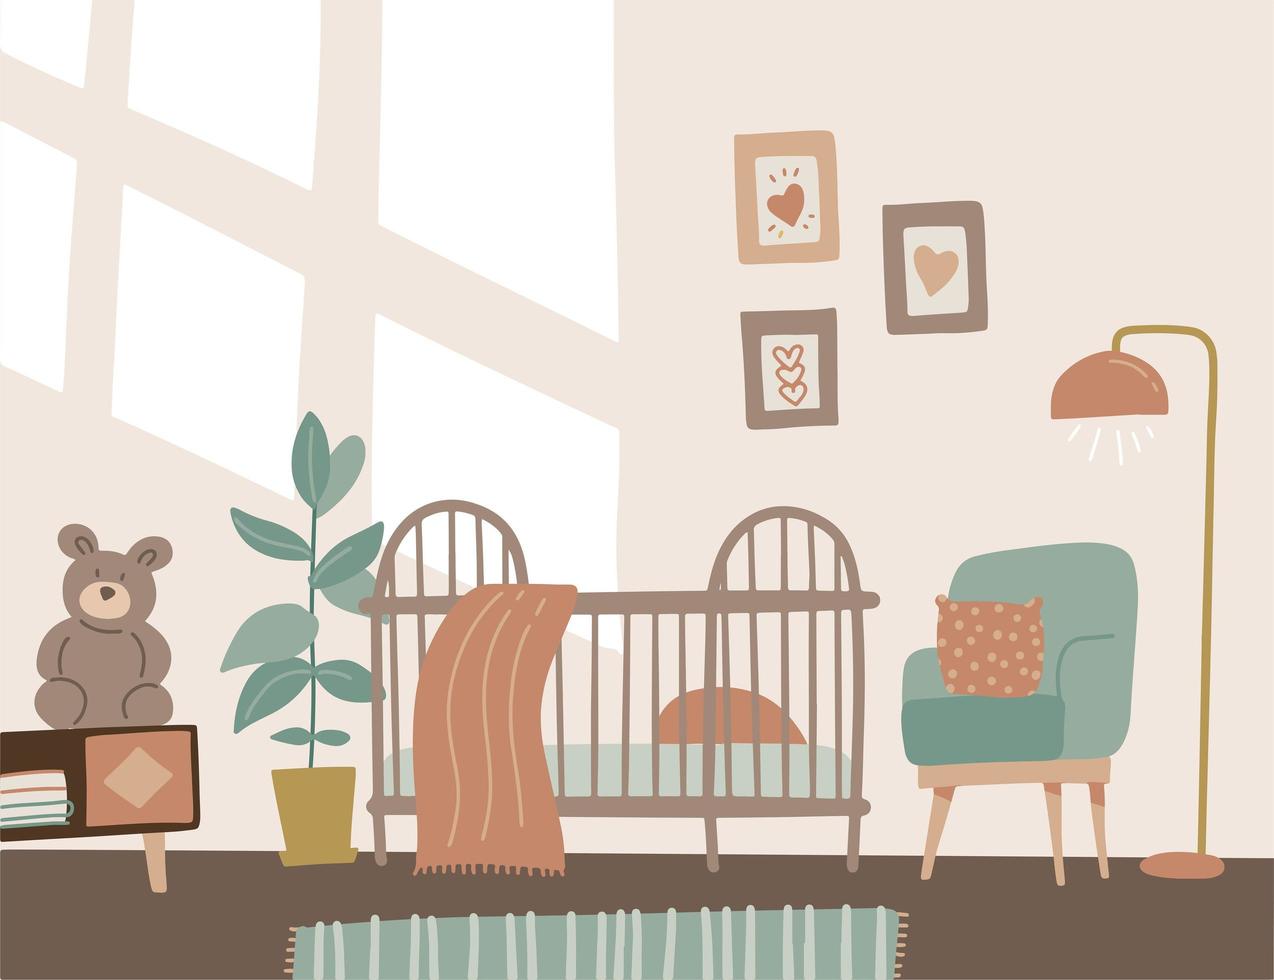 Modern comfortable baby toddler bedroom, nursery room interior. Baby crib, chair, table and plant. Wall with decorations and window light. Flat style vector illustration. Scandinavian style.